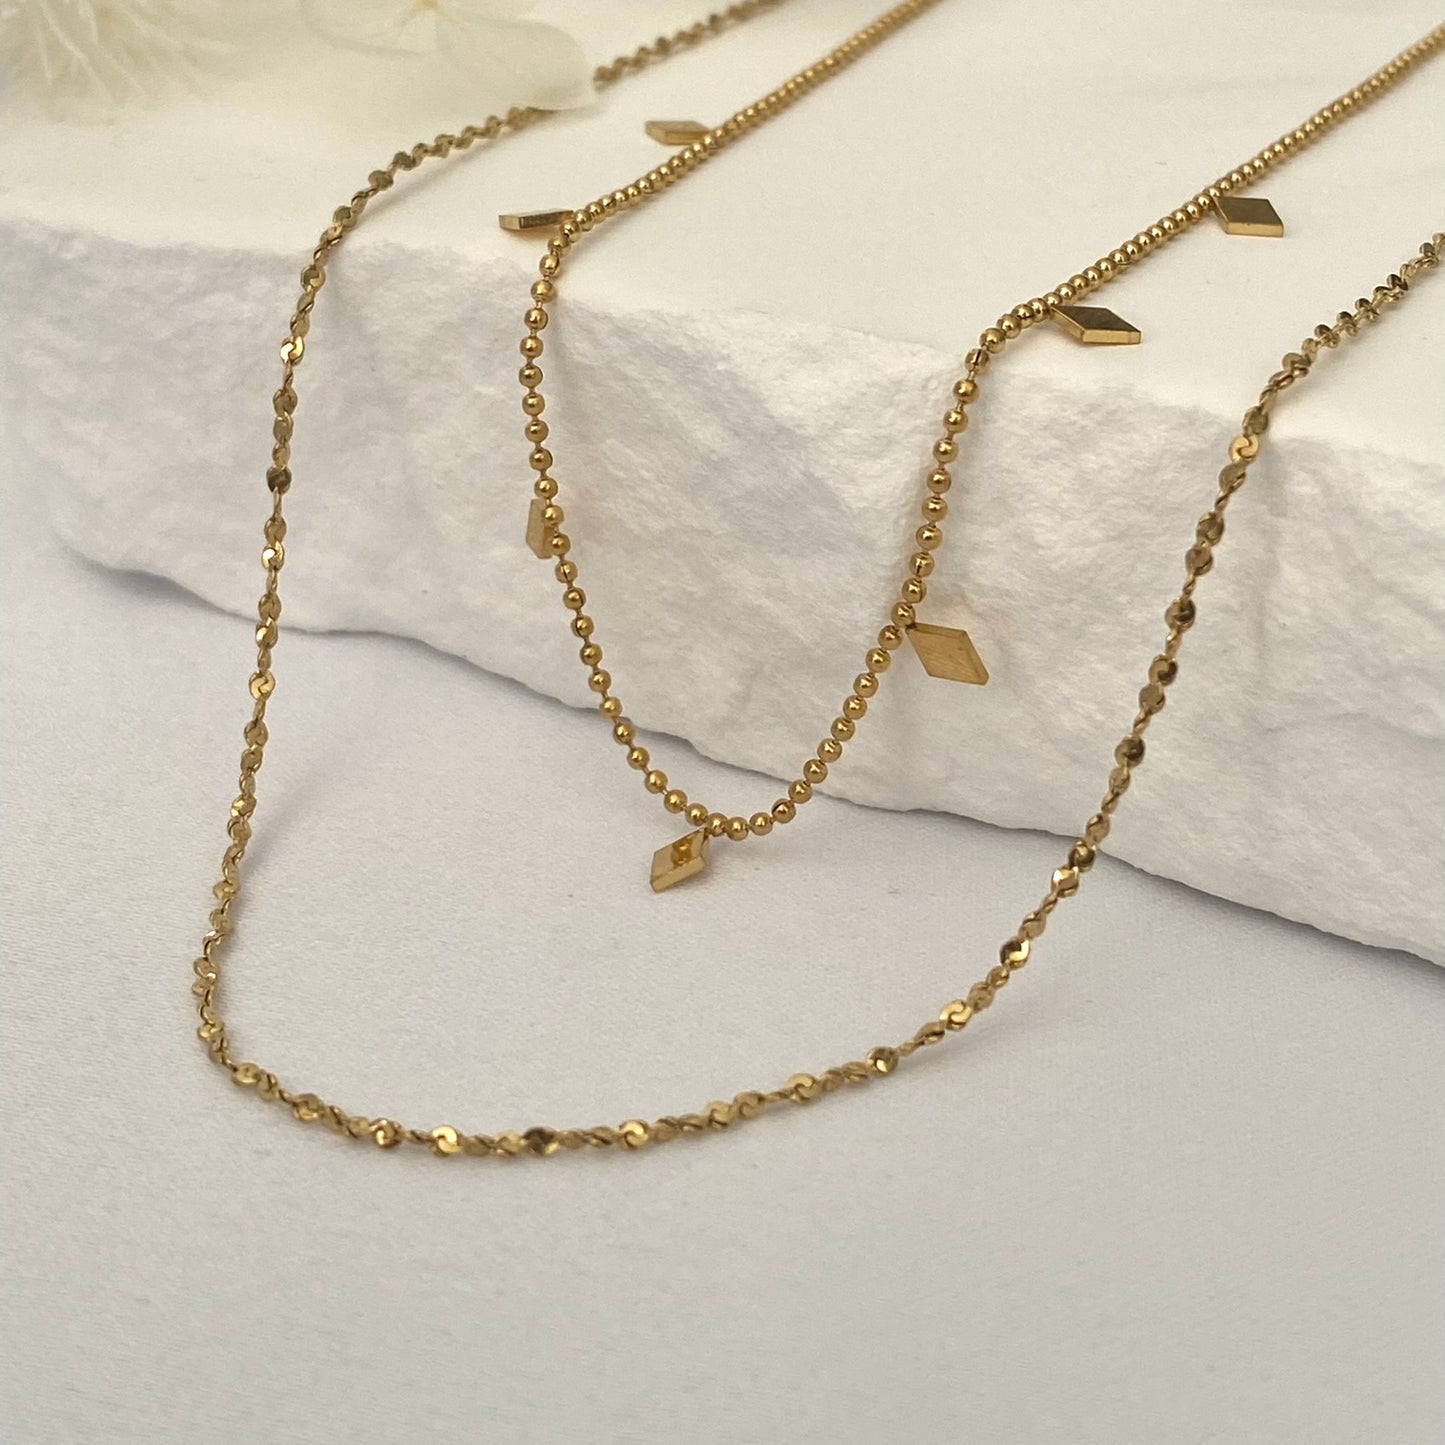 Stainless Steel Double Layered Gold Necklace Minimalist